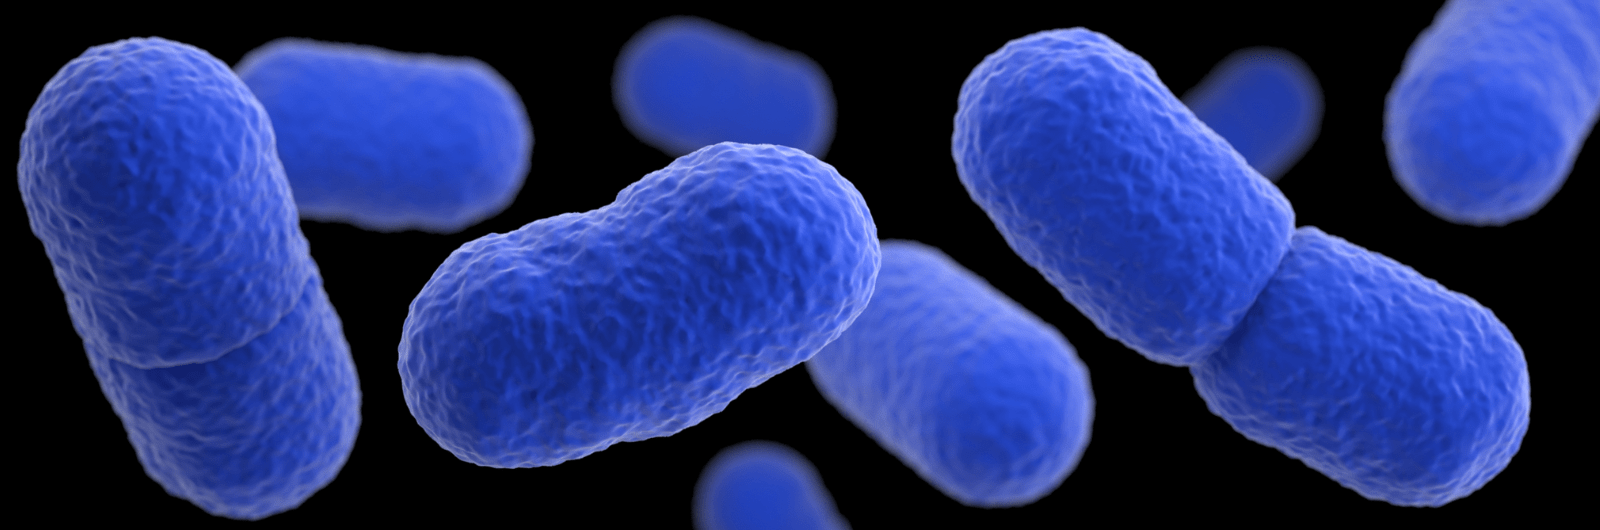 CDC 3d rendered image of Listeria